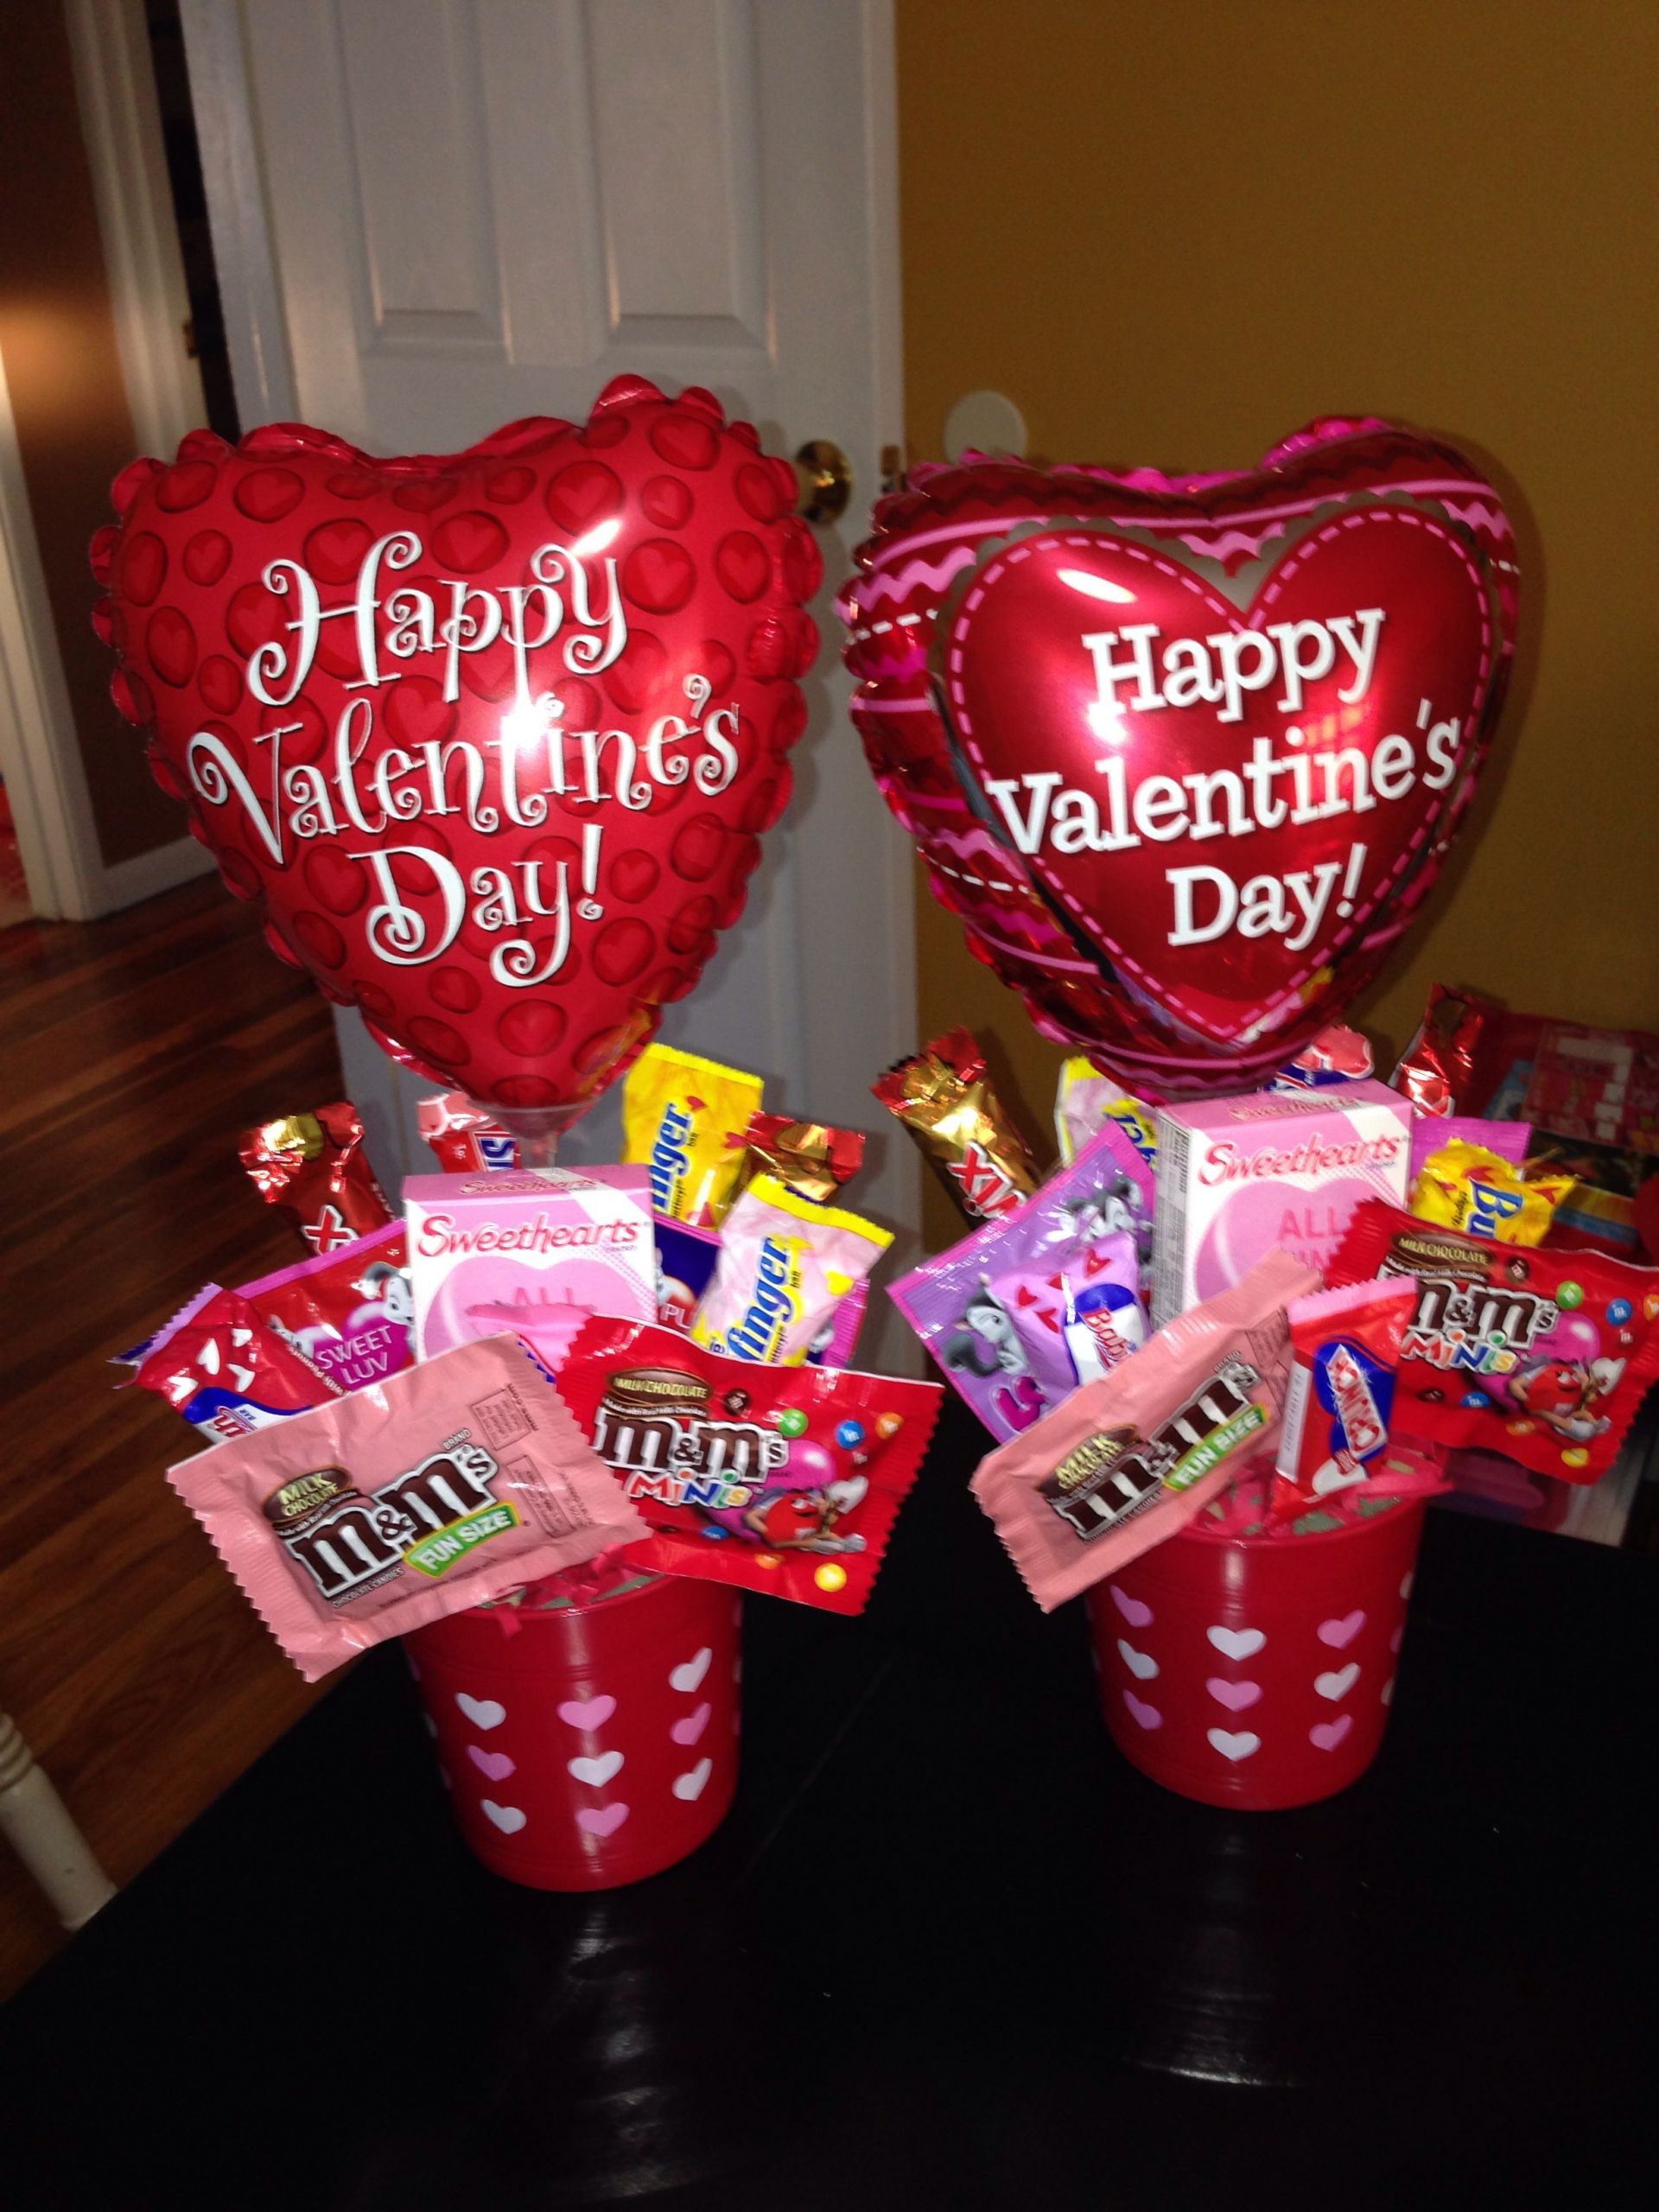 Cheap Valentines Day Gift Ideas
 Small valentines bouquets